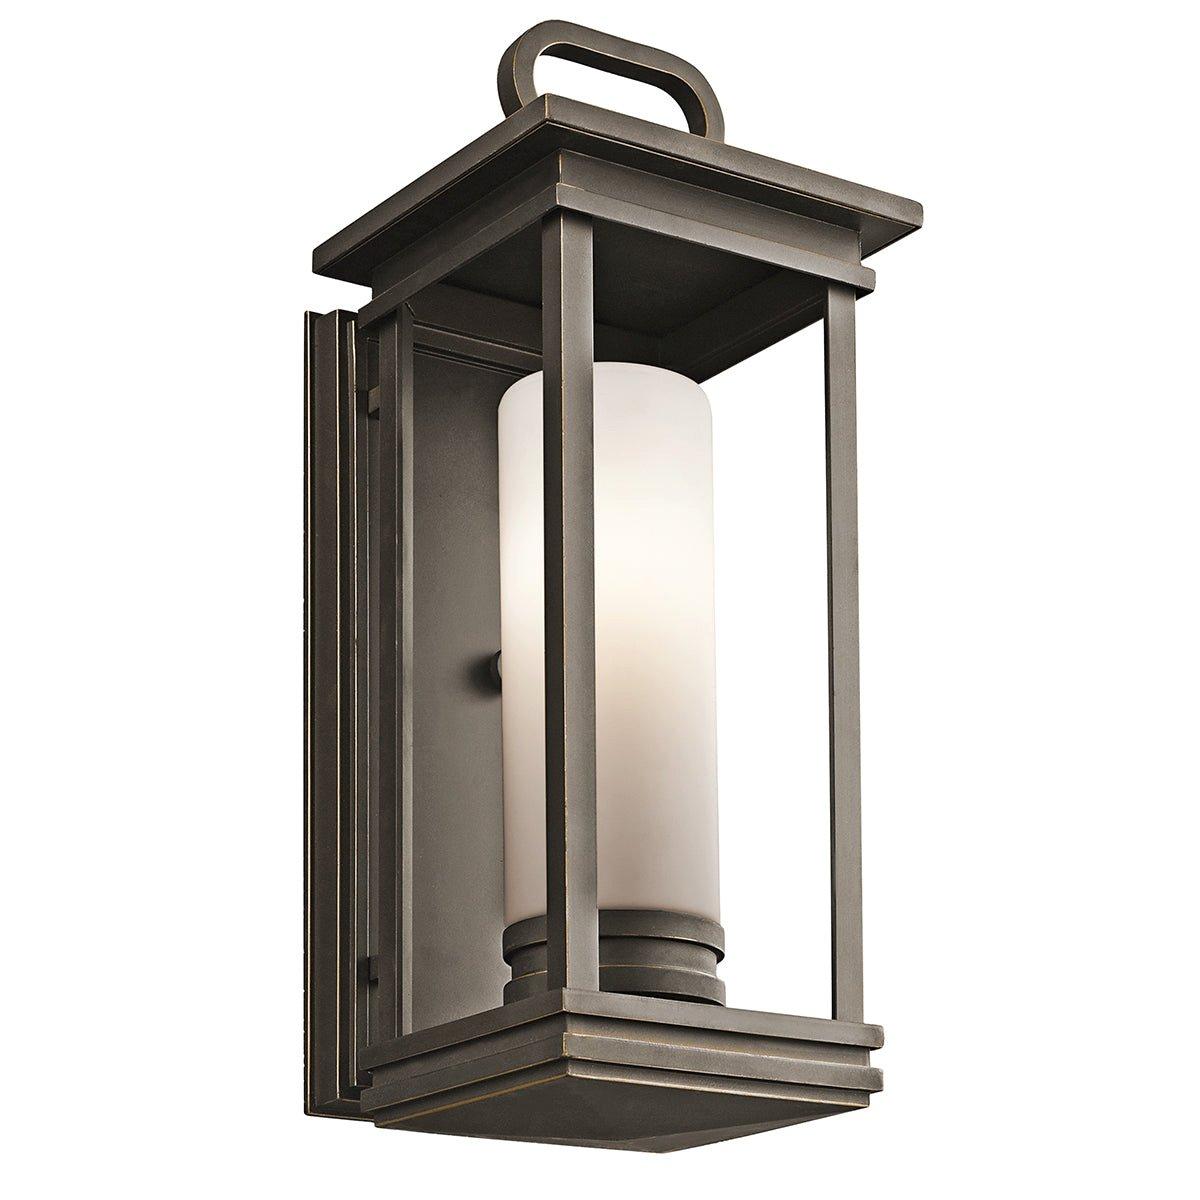 Outdoor IP44 Wall Light Sconce Rubbed Bronze LED E27 60W Bulb Outside External